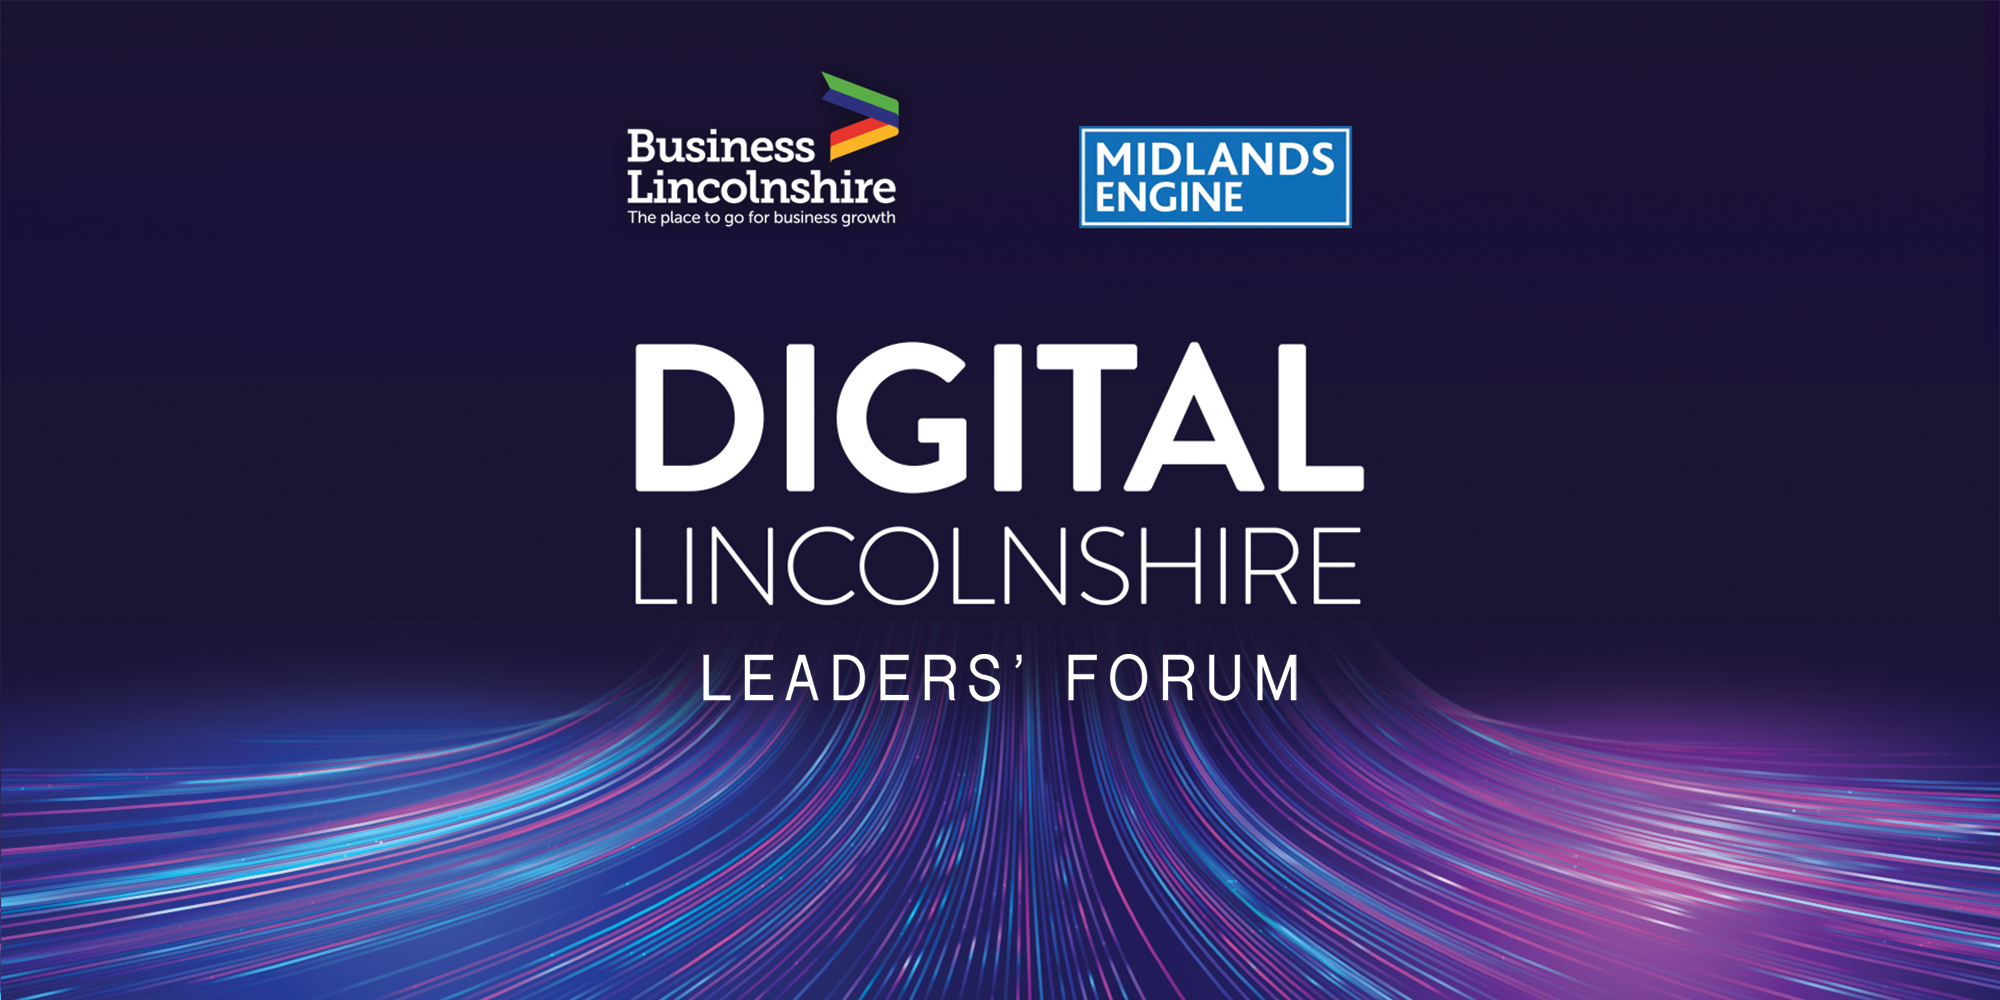 An image with the words Digital Lincolnshire Leaders Forum and the logos for Business Lincolnshire and Midlands Engine as the funders of the event.